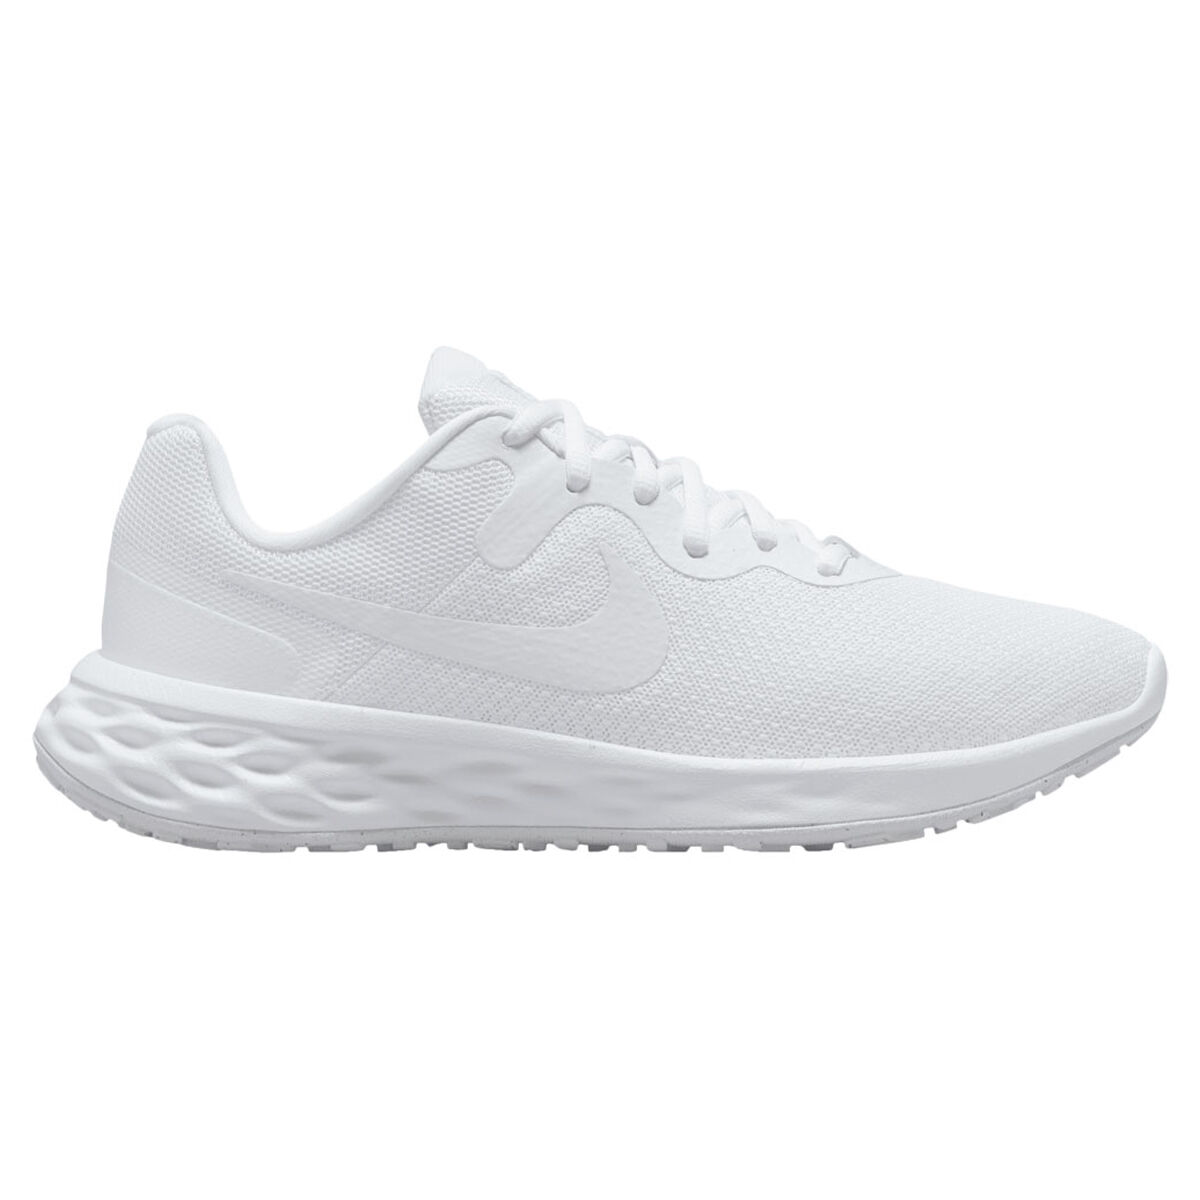 Women's Shoes | Running, Sneakers, Trainers & more | rebel